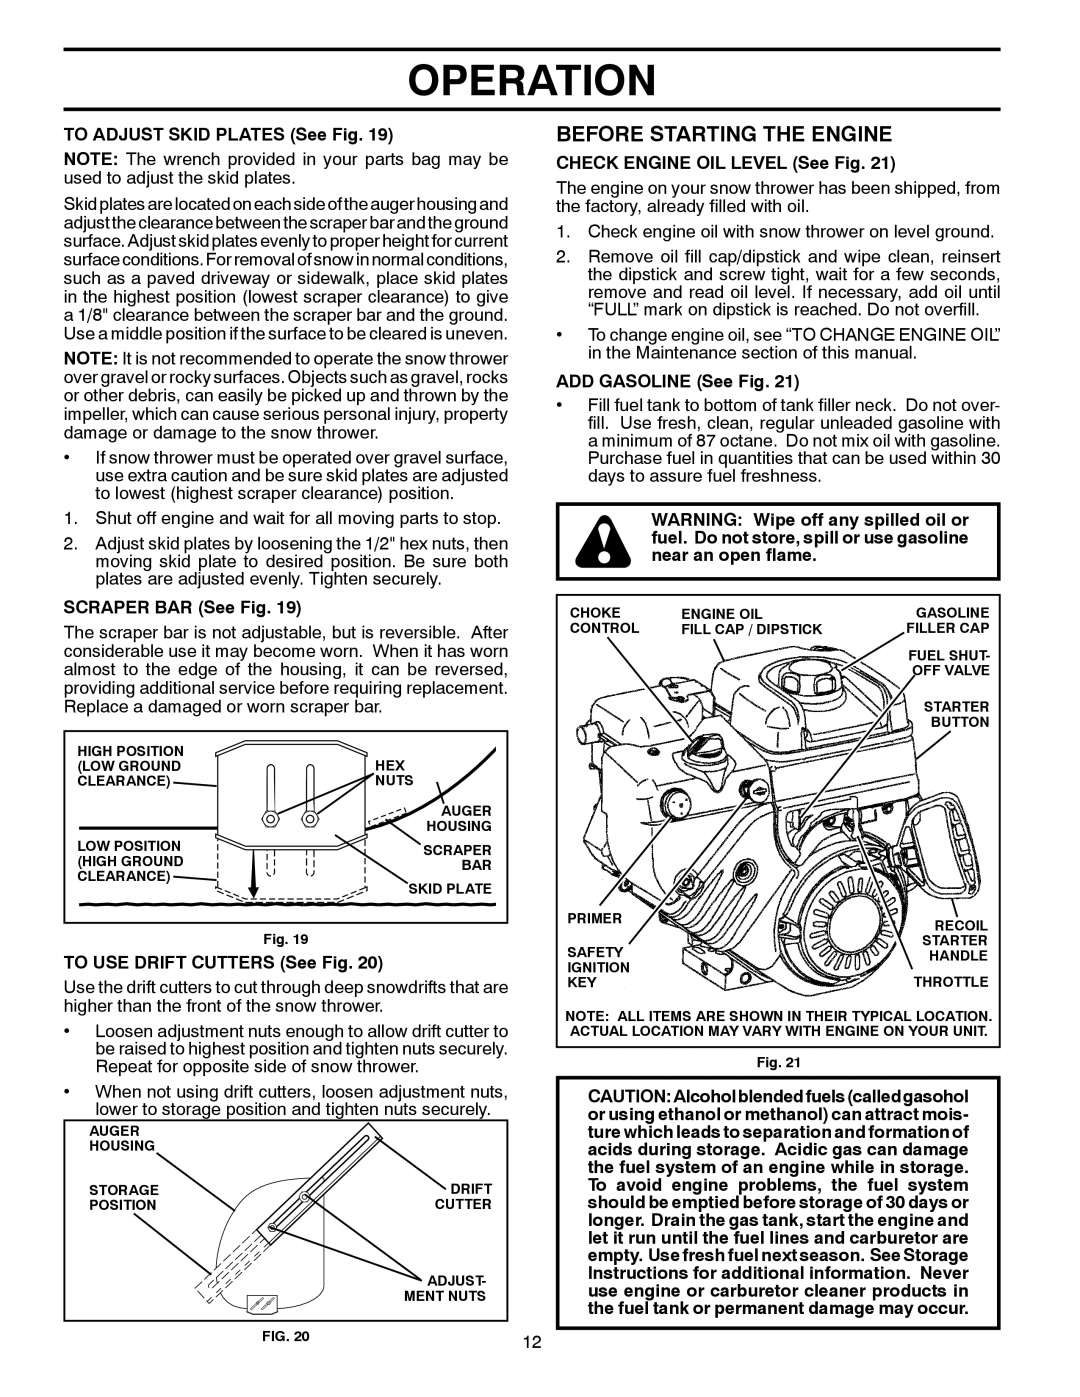 Husqvarna 16530-LS manual Before Starting The Engine, Operation, TO ADJUST SKID PLATES See Fig, SCRAPER BAR See Fig 